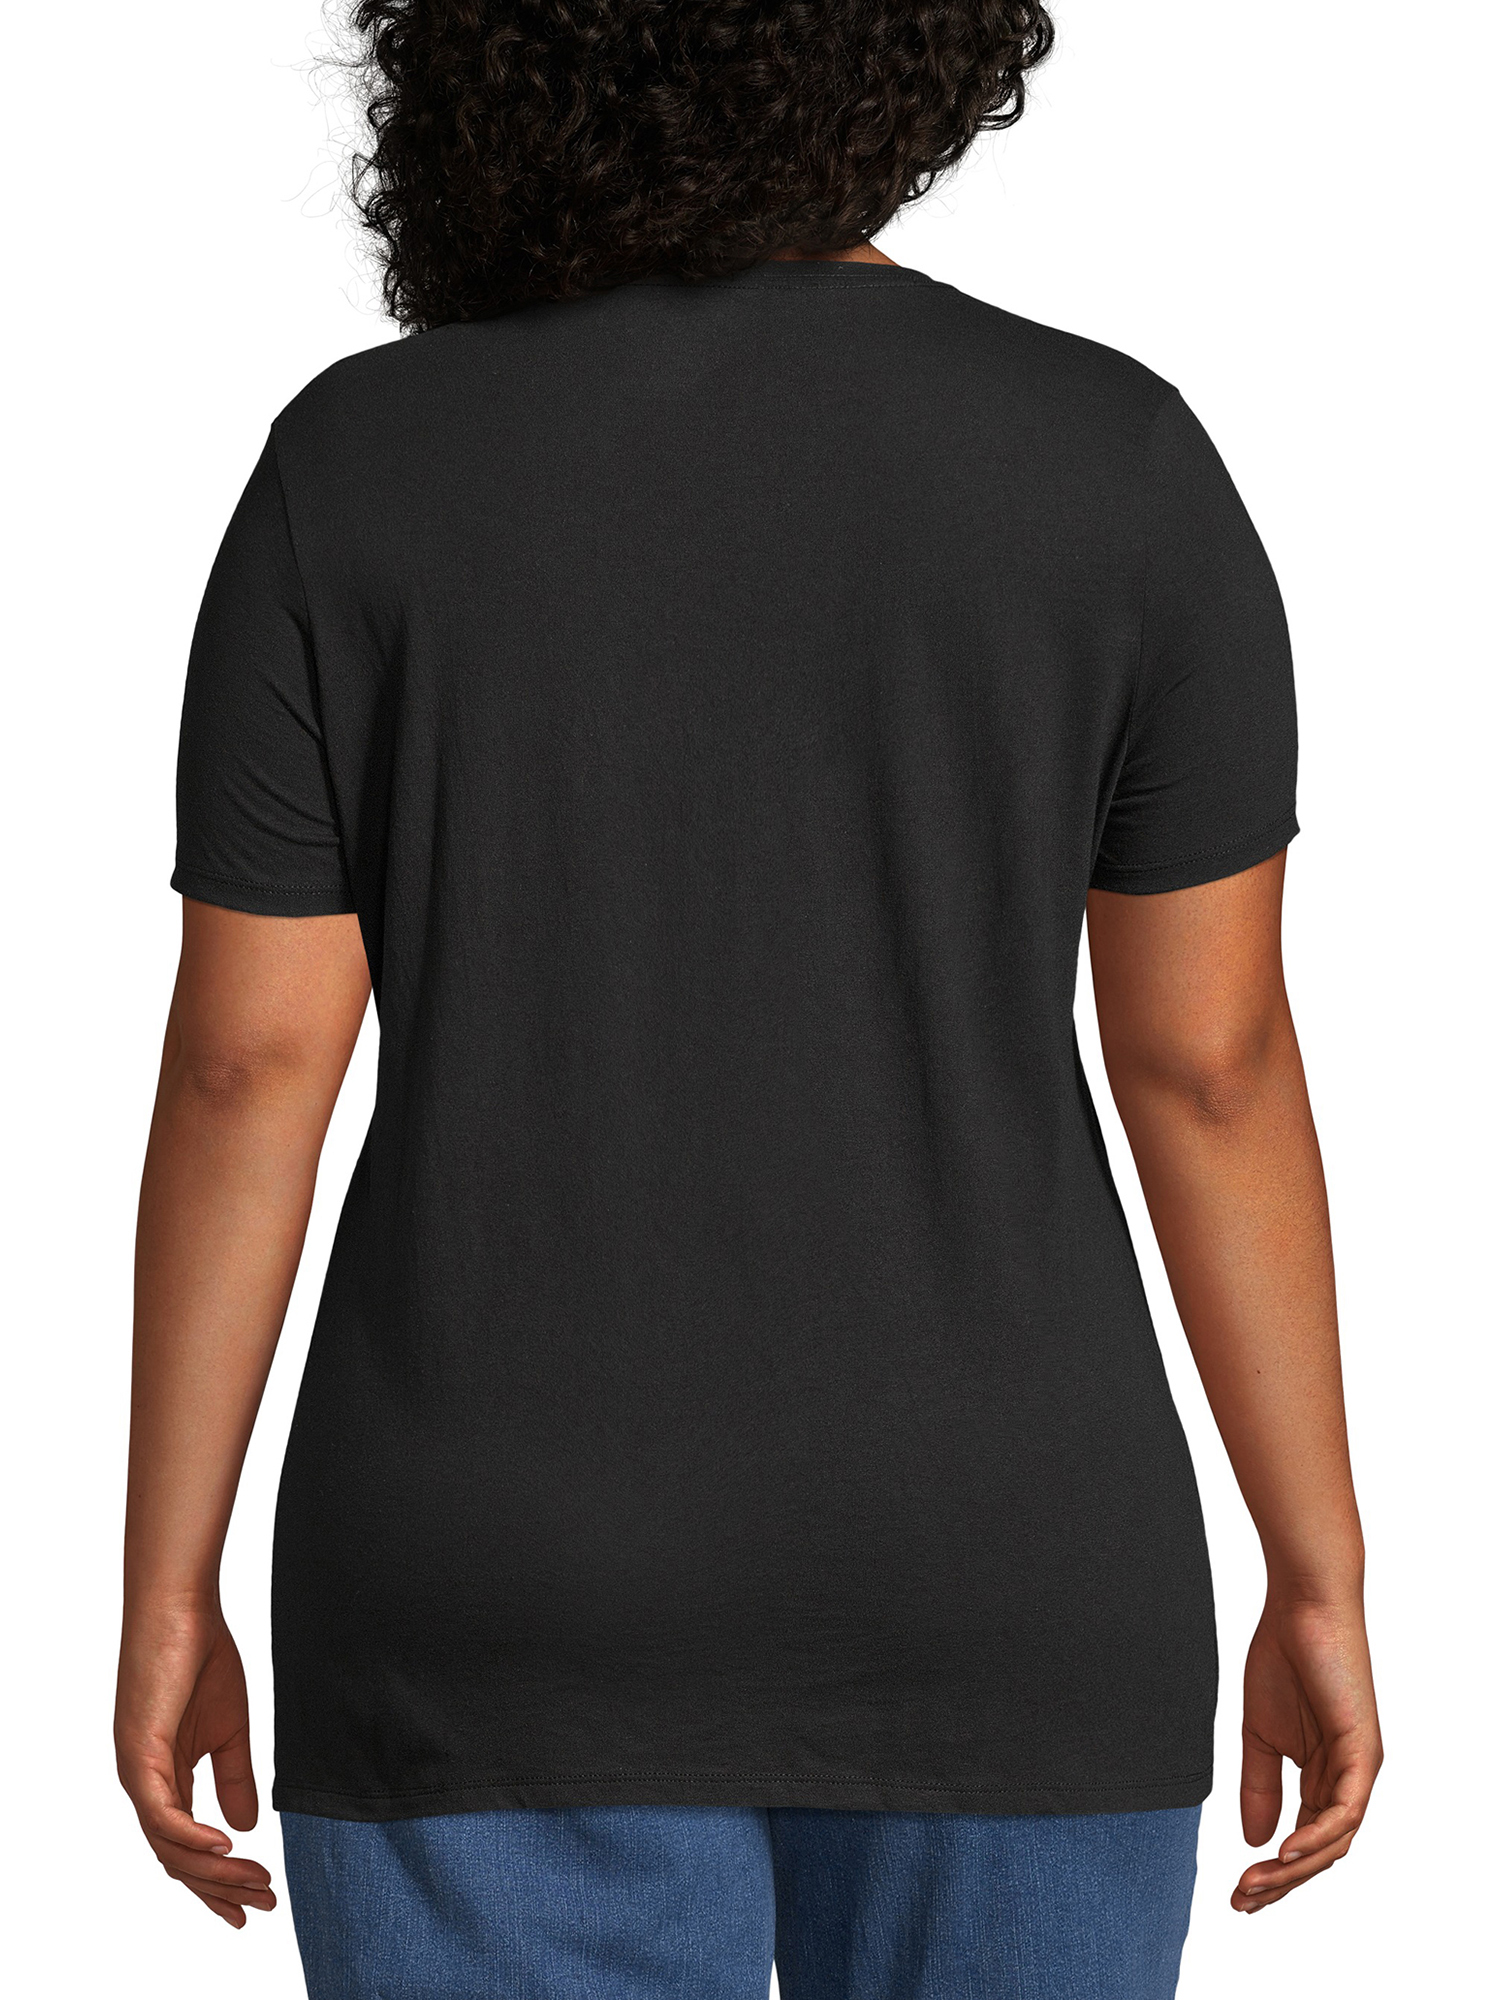 Just My Size Women's Plus Size Graphic Short Sleeve V-neck Tee - image 3 of 5